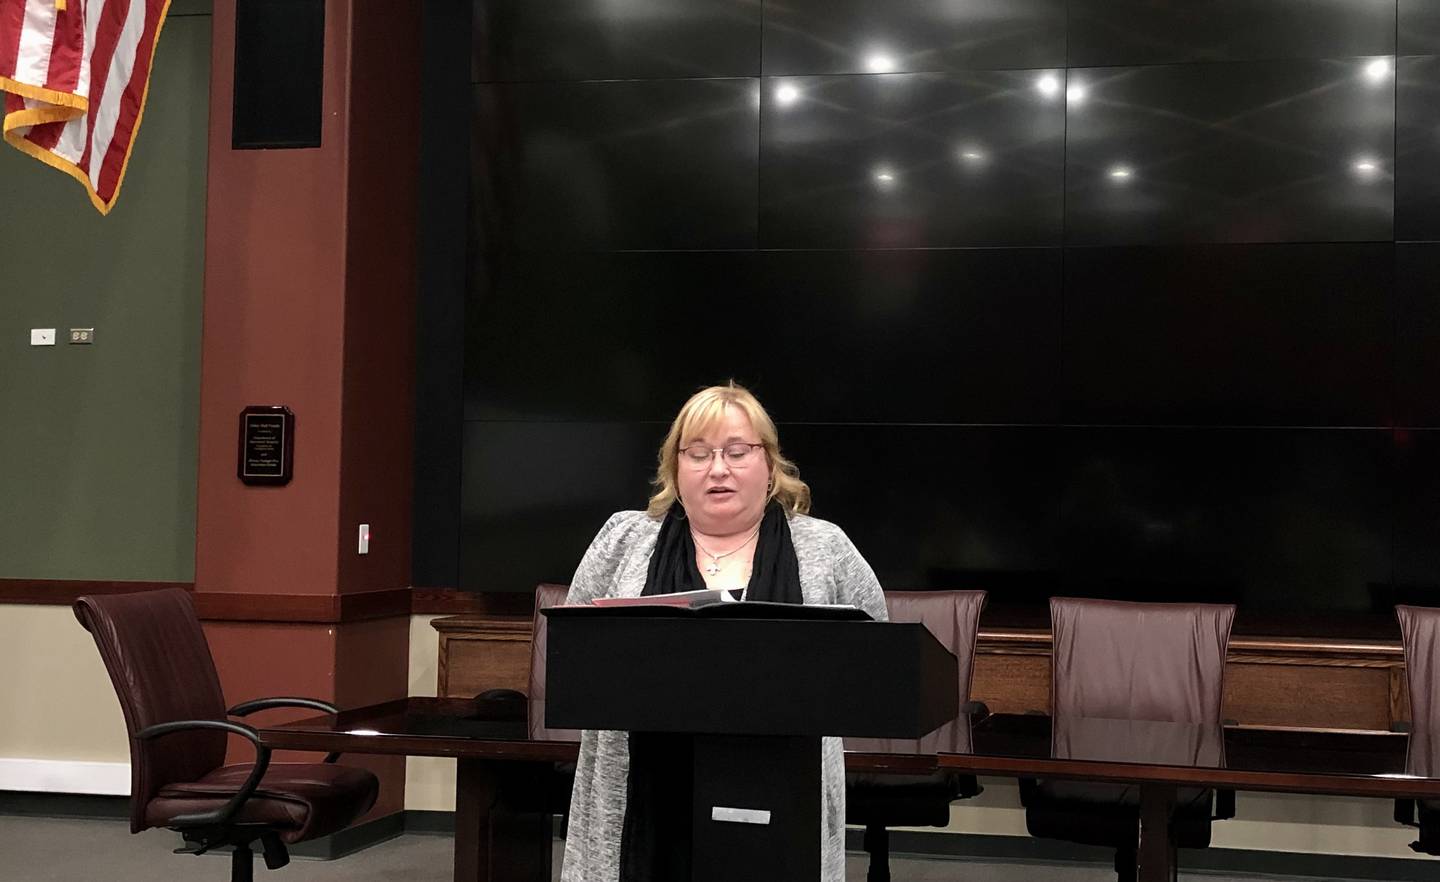 Oswego Village Board candidate Karin McCarthy-Lange answers questions Monday, March 20, 2023 at a candidate forum held by the Oswego Chamber of Commerce at the Oswego Fire Protection District at 3511 Woolley Road.